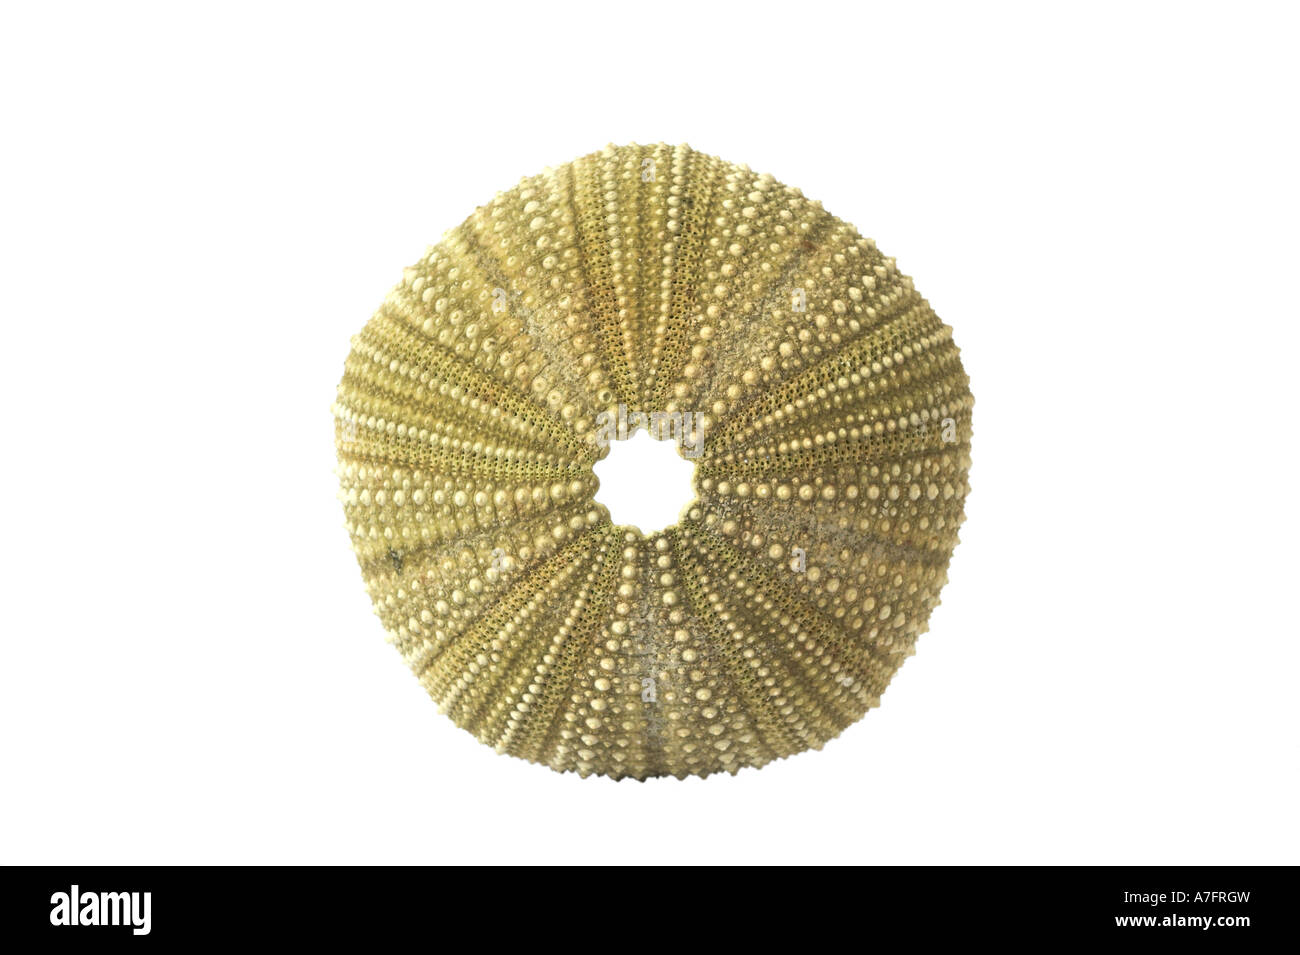 SEA URCHIN TEST OR SHELL against a white background Stock Photo